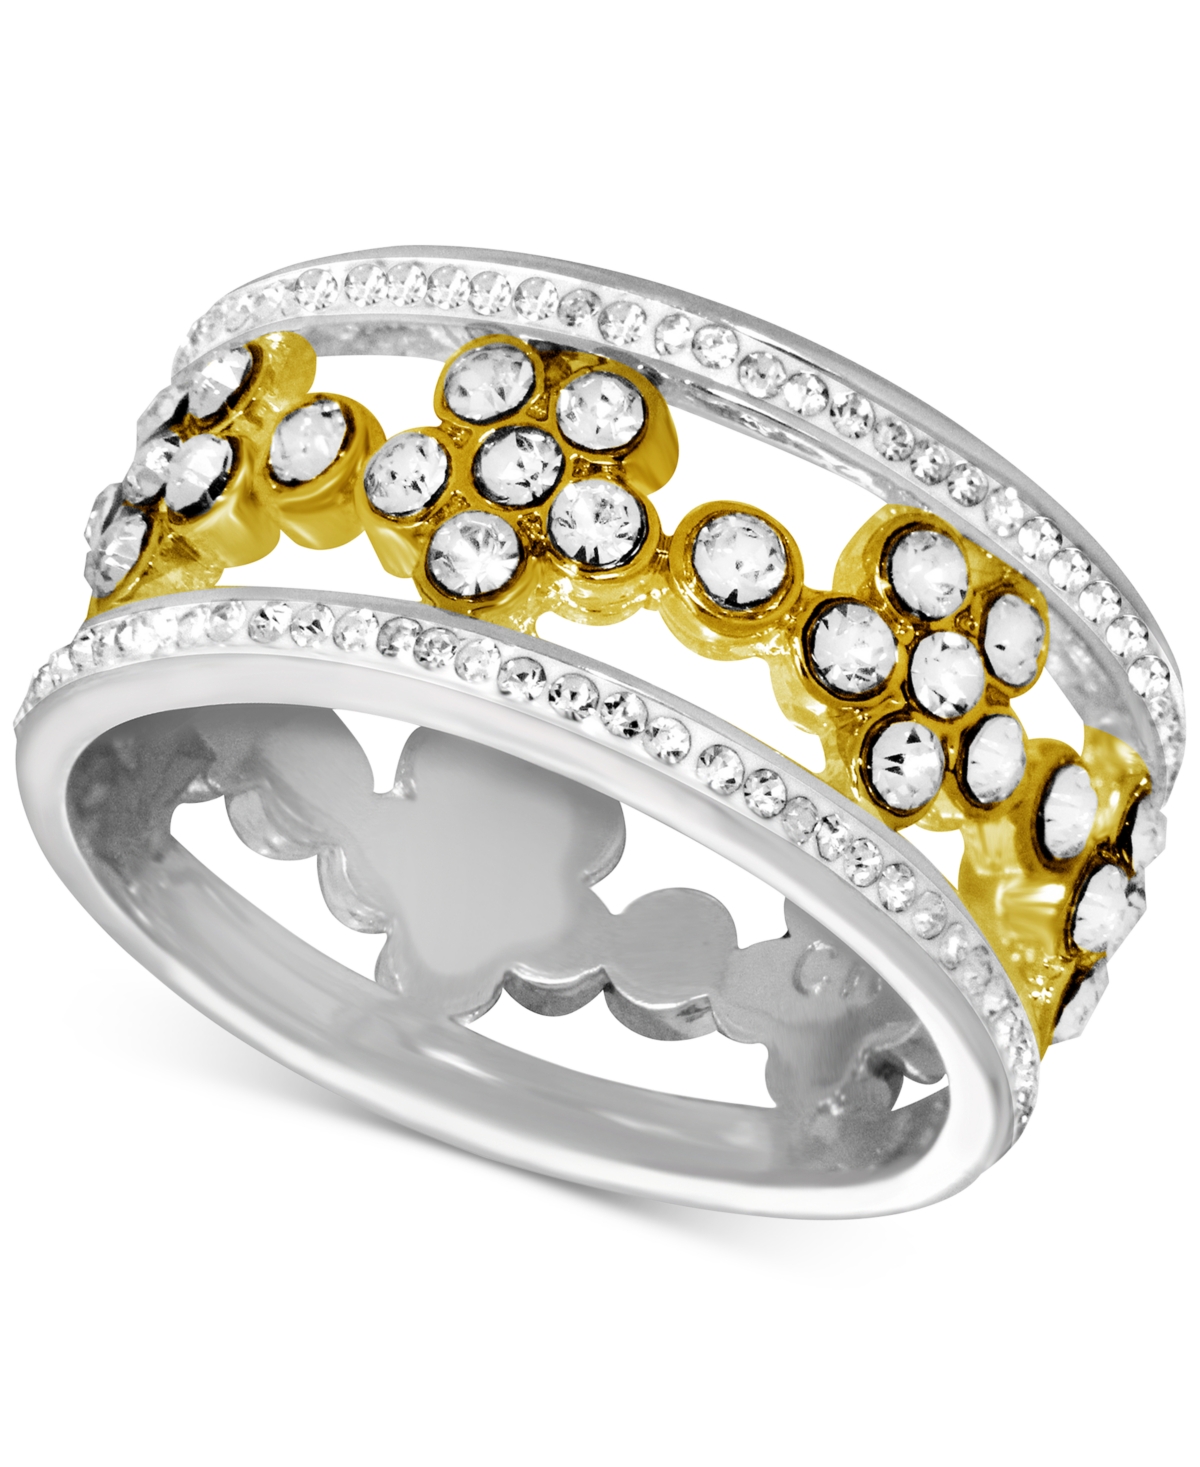 Floral Crystal Openwork Band Ring in Two-Tone Plate - Two-Tone